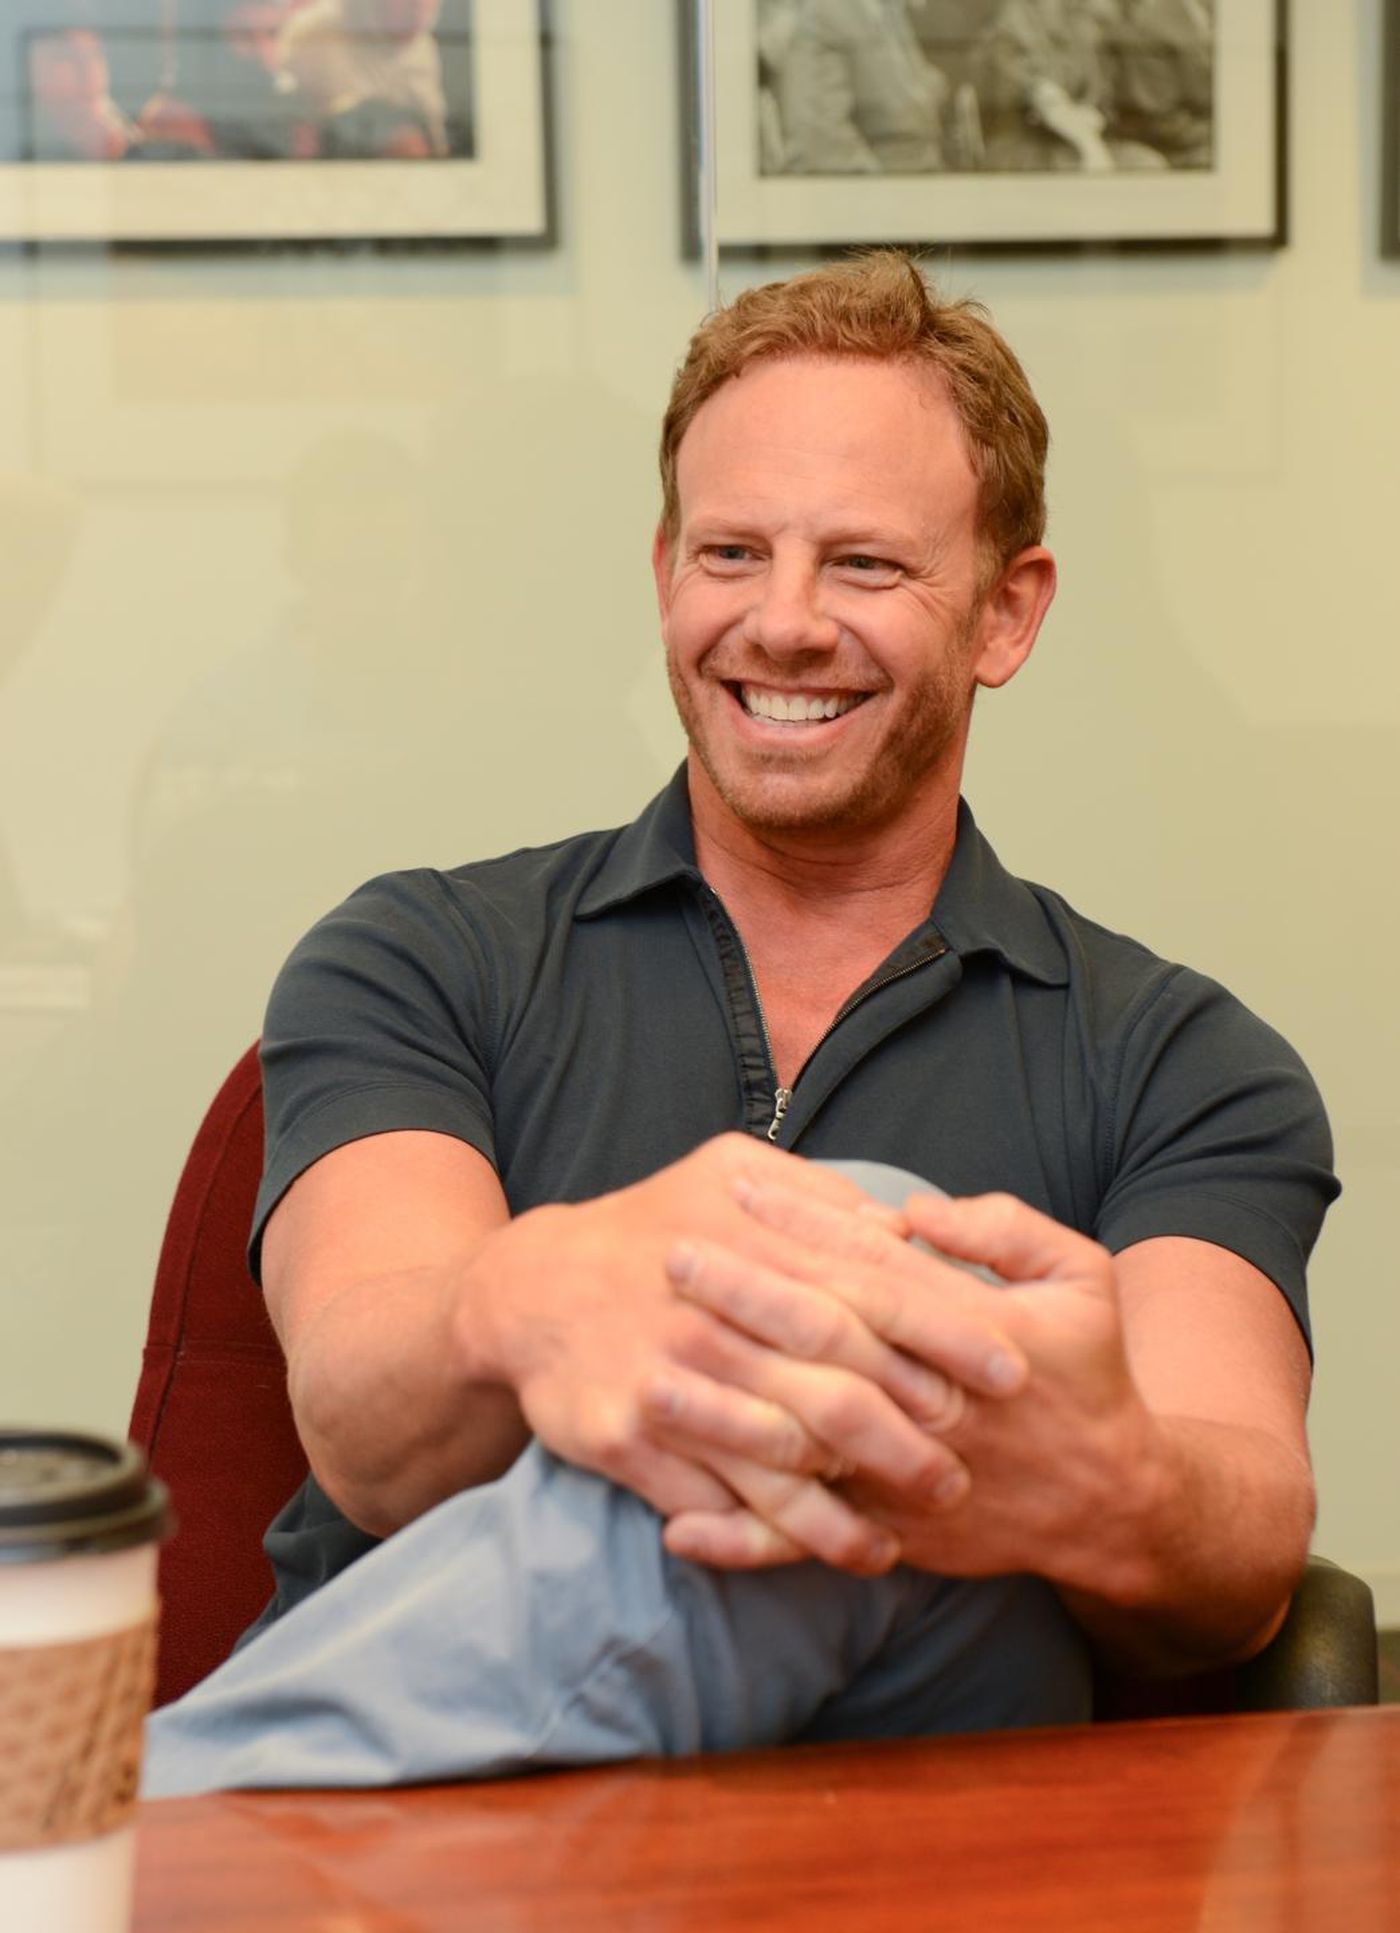 https://static.wikia.nocookie.net/marvelanimated/images/1/1e/Ian_Ziering.jpg/revision/latest?cb=20190331030405